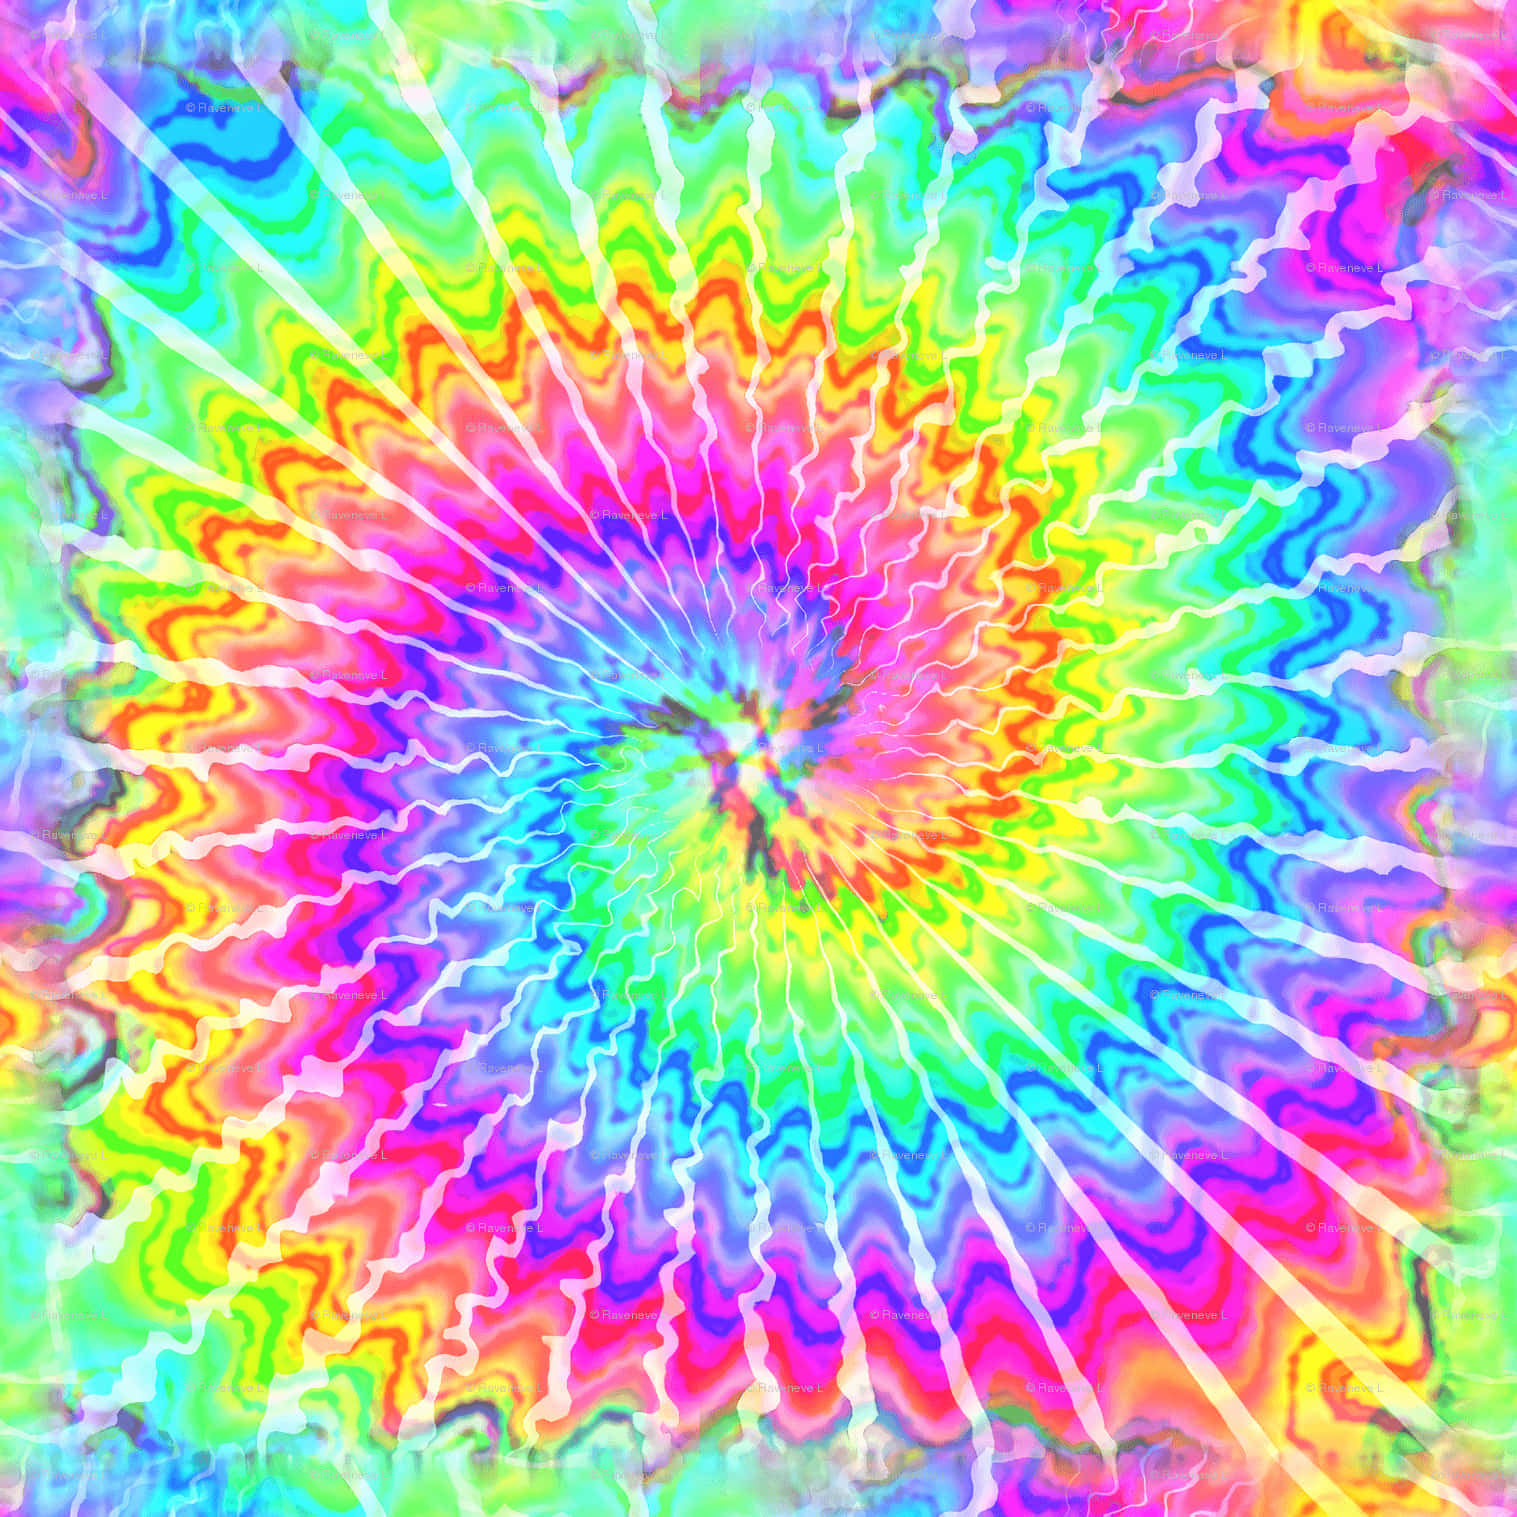 Fun and Vibrant High-Resolution Tie Dye